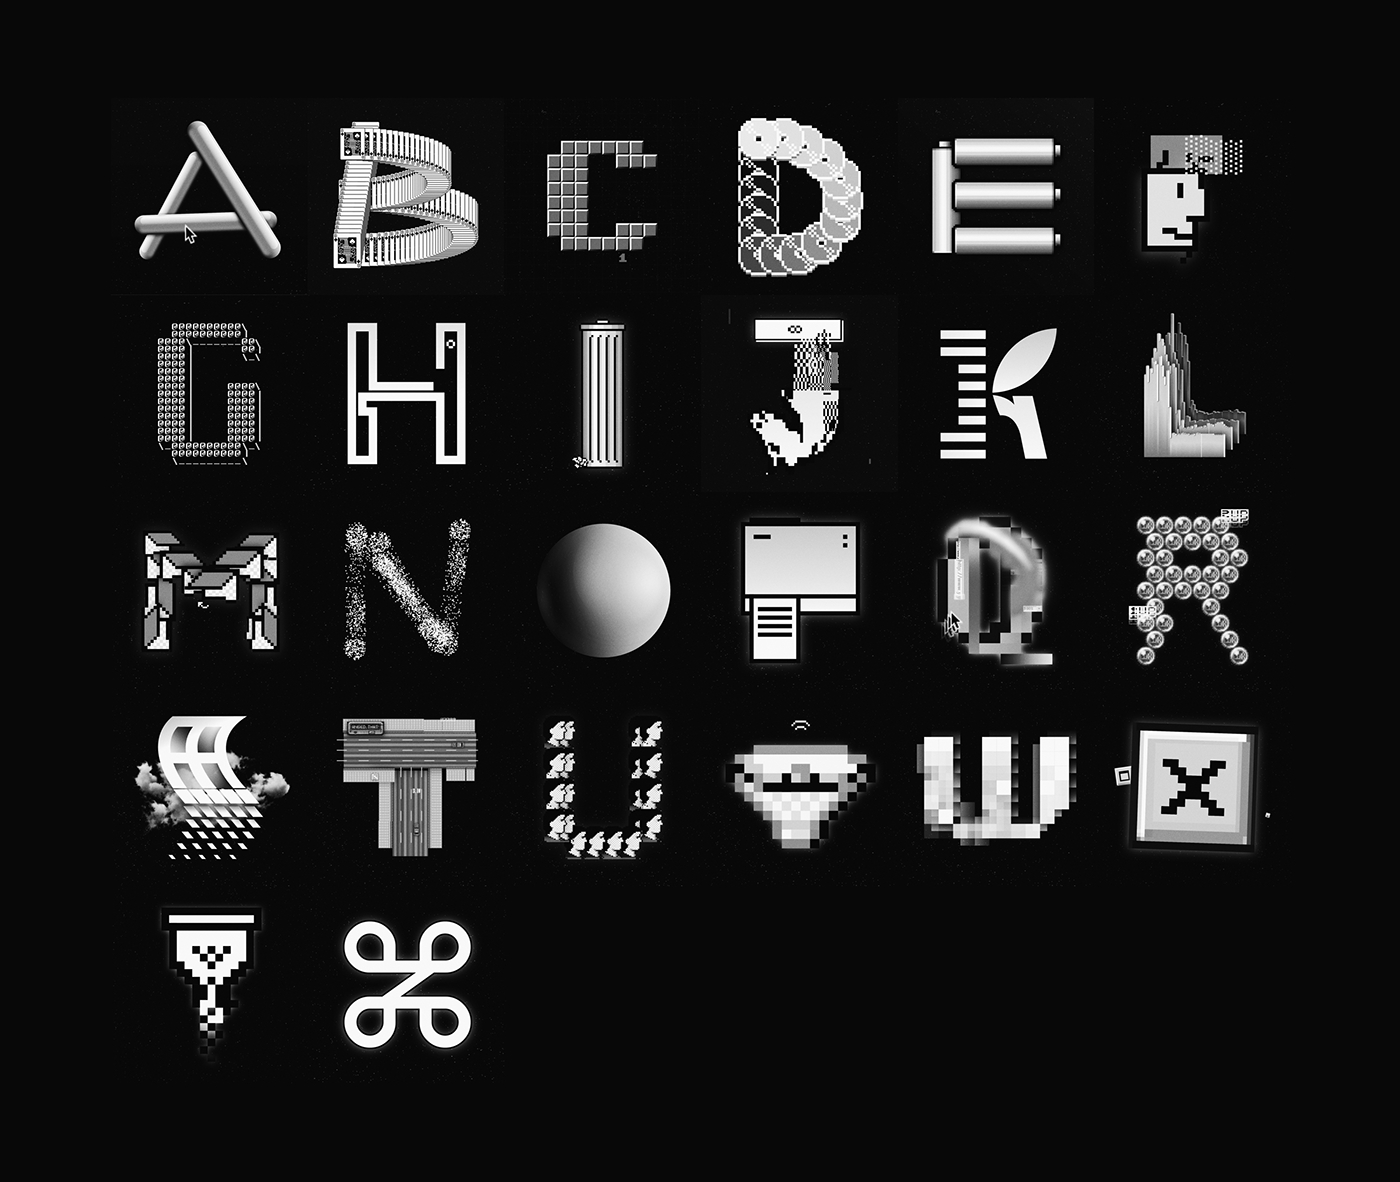 36daysoftype type letters lettering graphical user interface Interface buttons pixel icons old interface Games Fun Side project daily project user interface